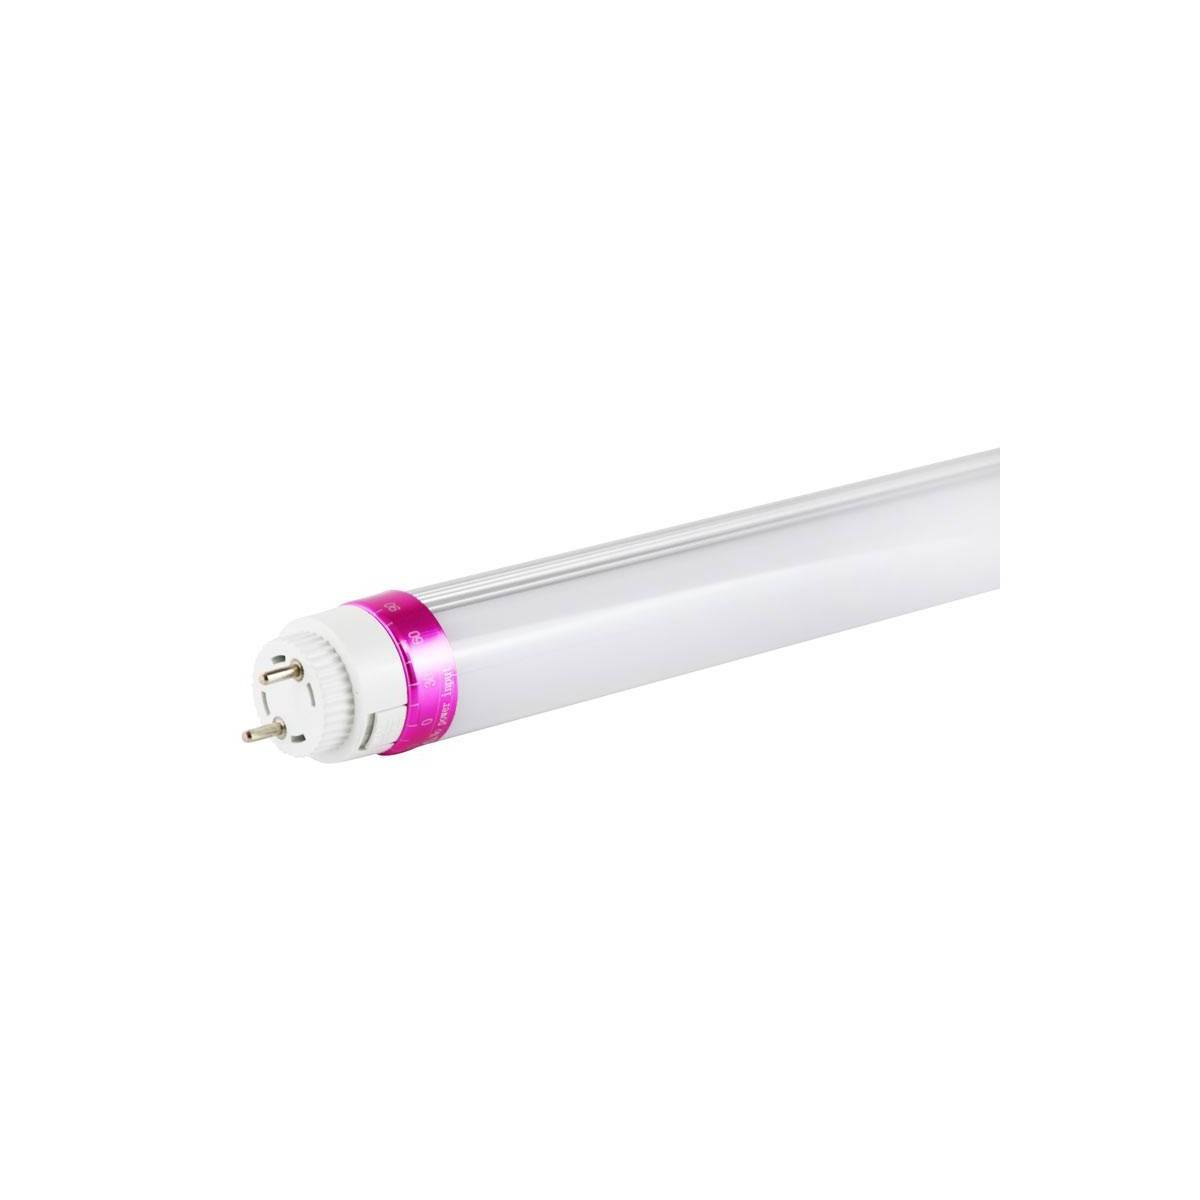 LED T8 tube special Delicatessen 10W 600mm